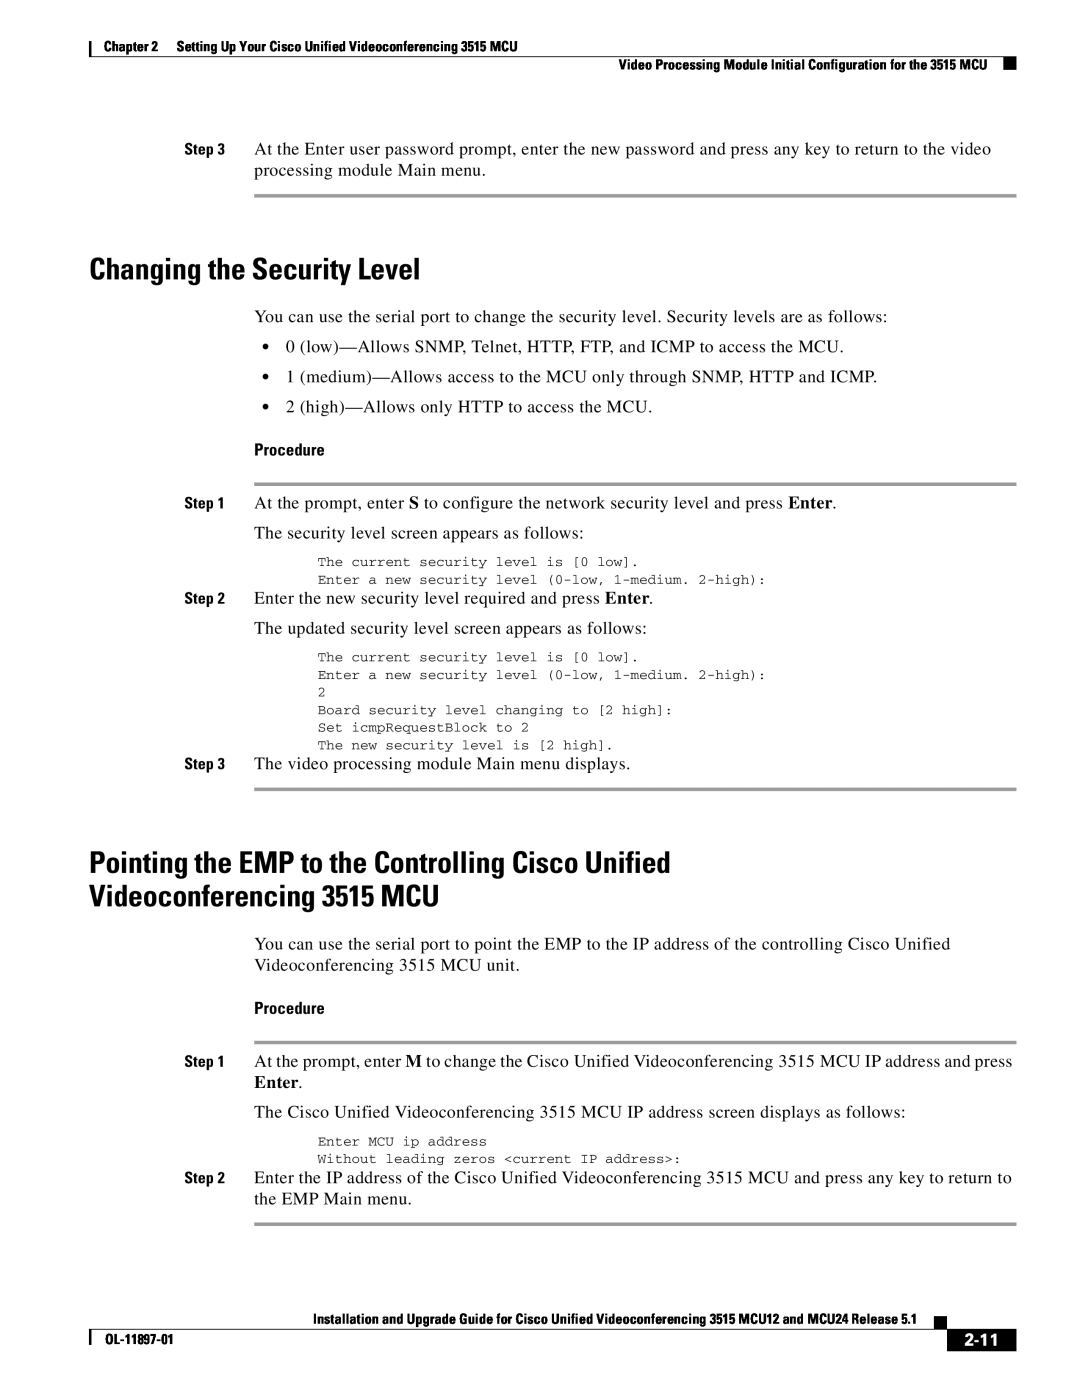 Cisco Systems MCU24 manual Changing the Security Level, Pointing the EMP to the Controlling Cisco Unified, 2-11 